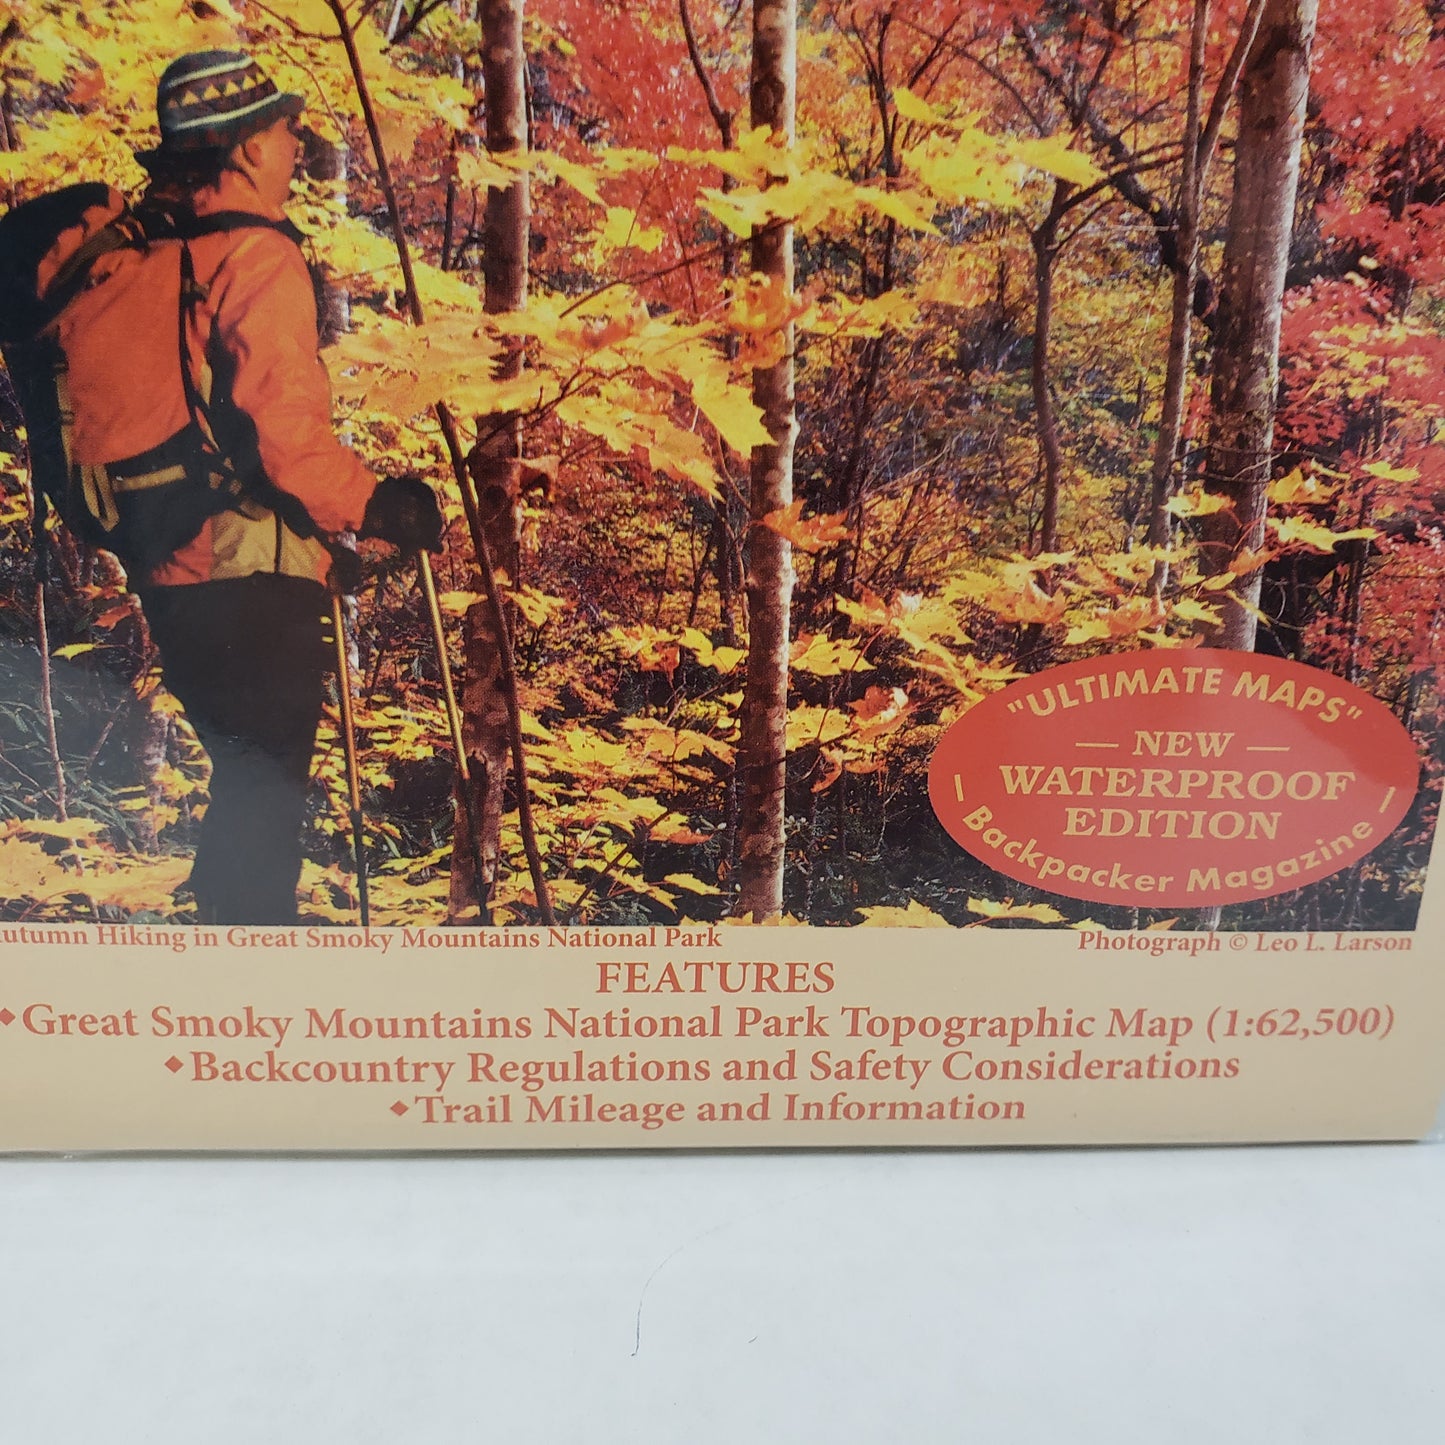 Great Smoky Mountains National Park Hiking Map and Guide